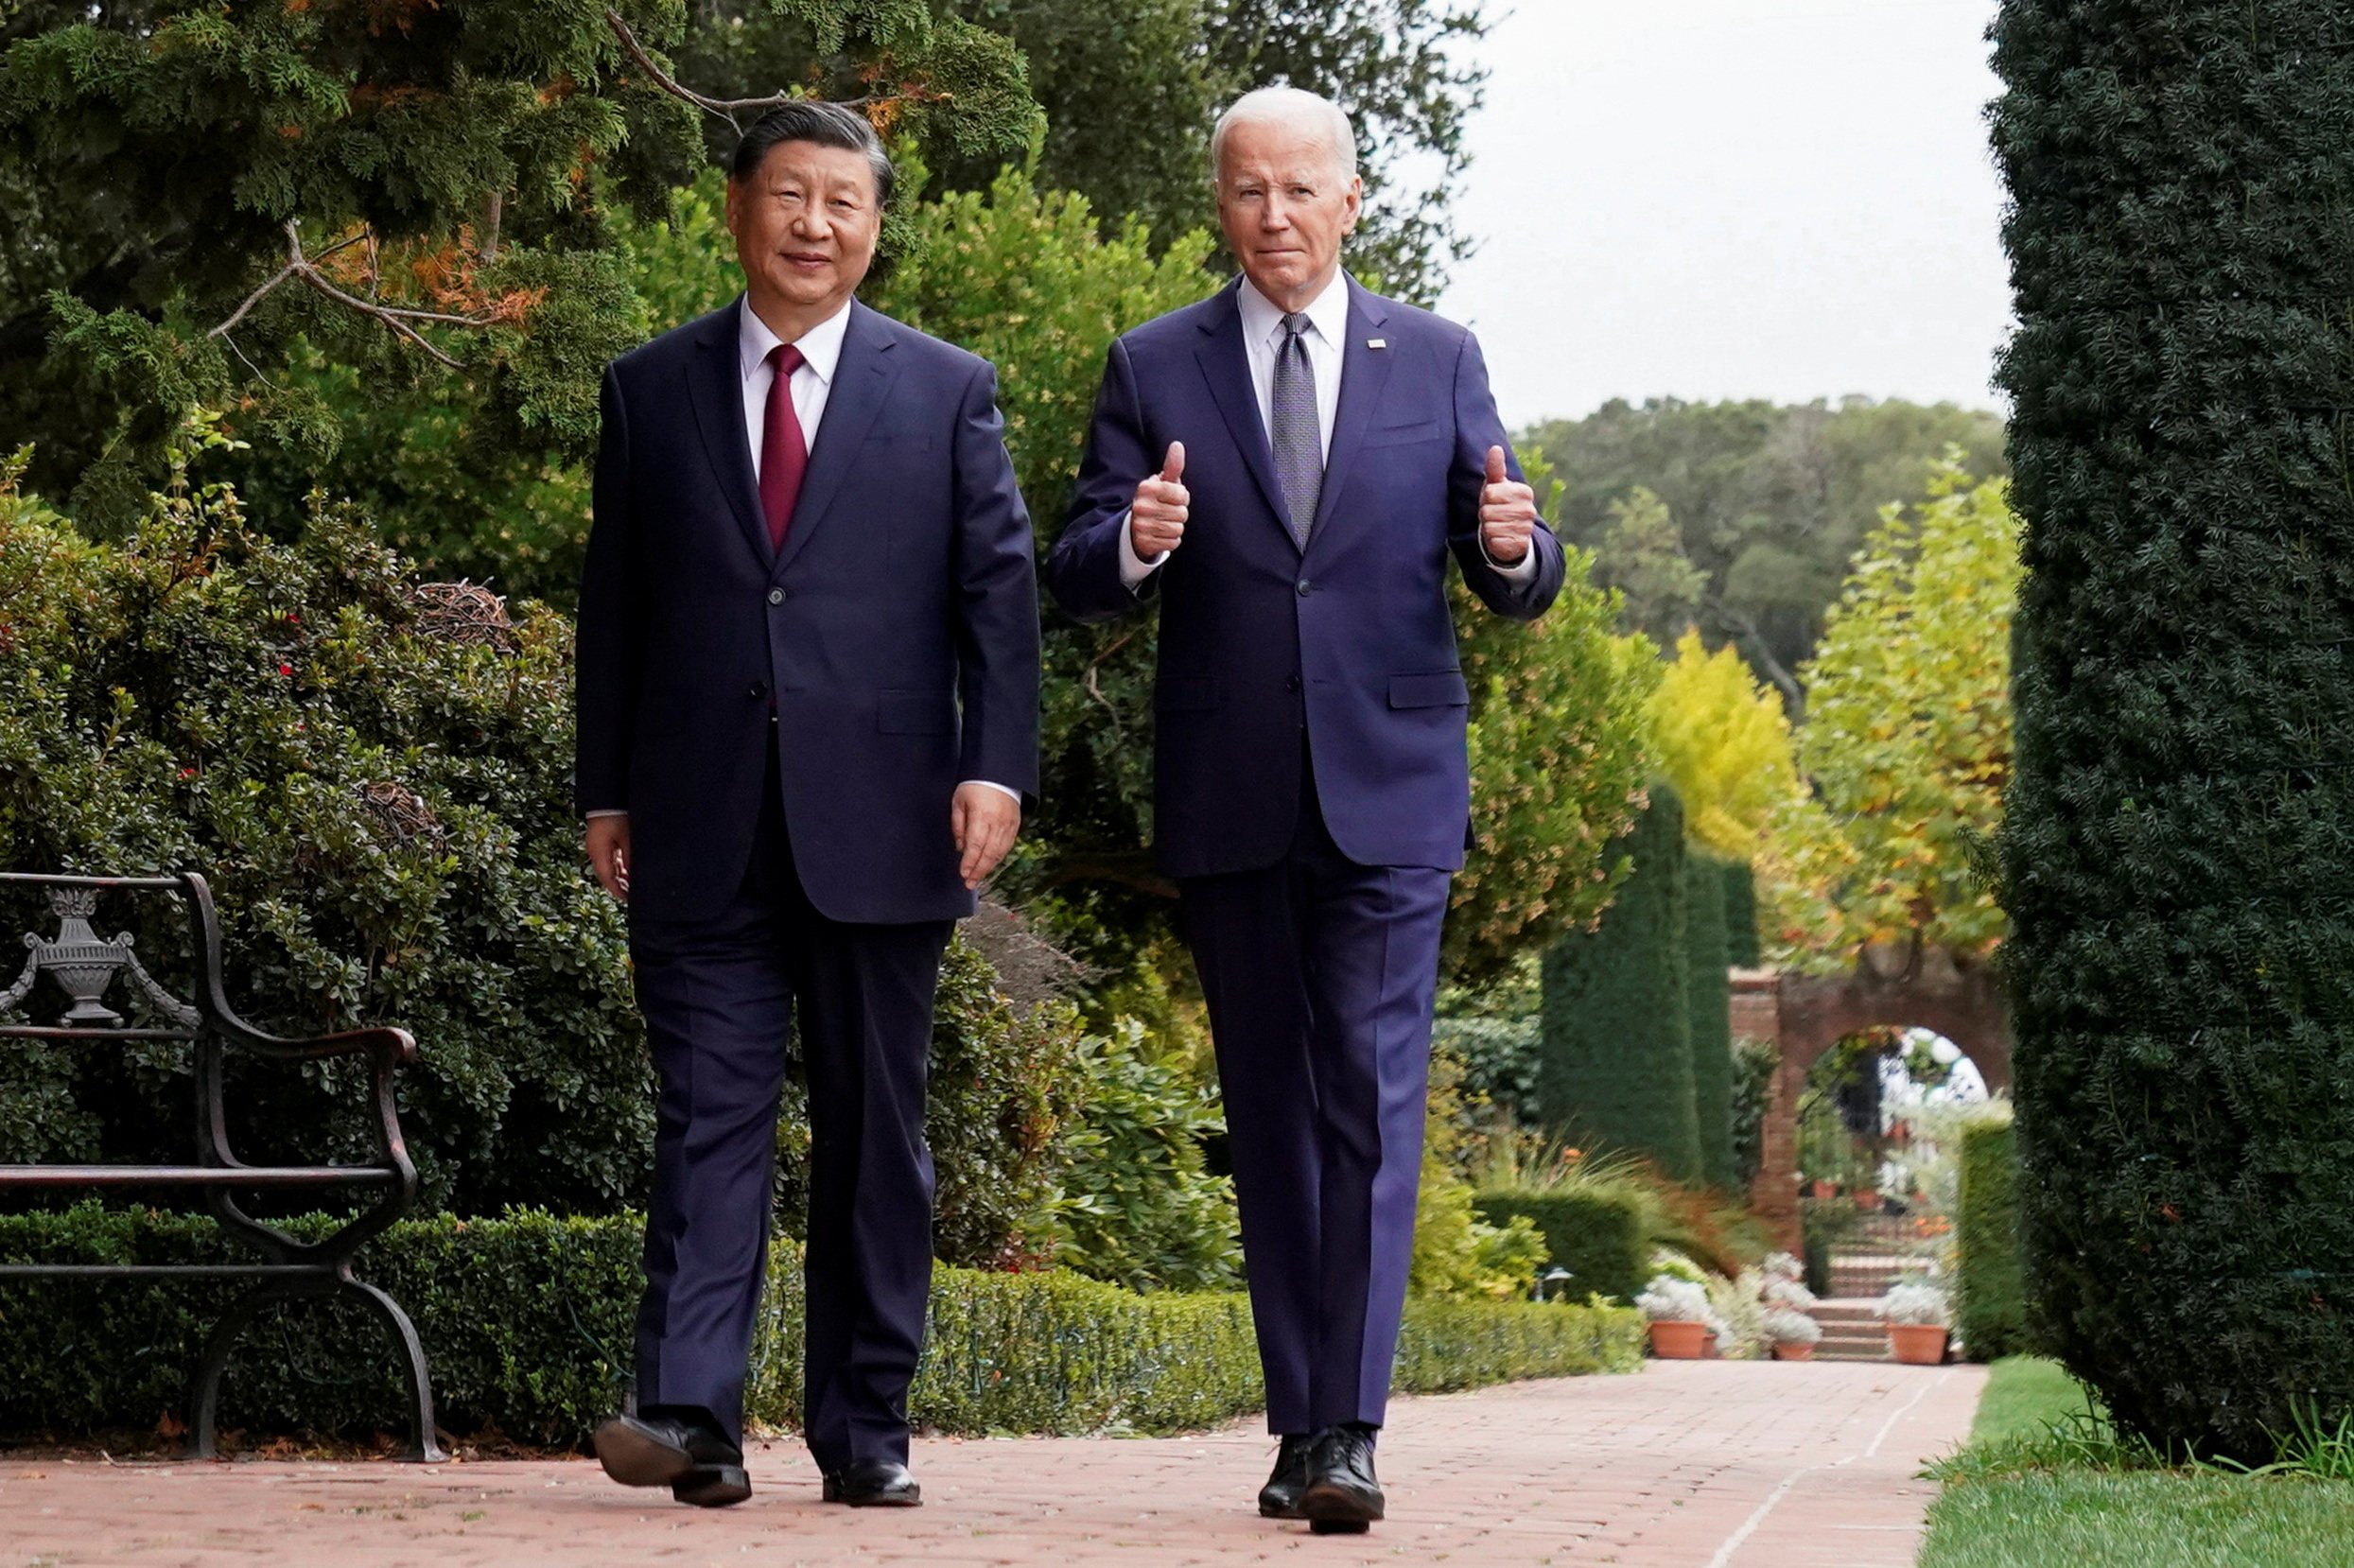 US President Joe Biden gives a thumbs-up as he walks with Chinese President Xi Jinping at Filoli estate on the sidelines of the Apec summit, in Woodside, California, on November 15. Photo: Reuters